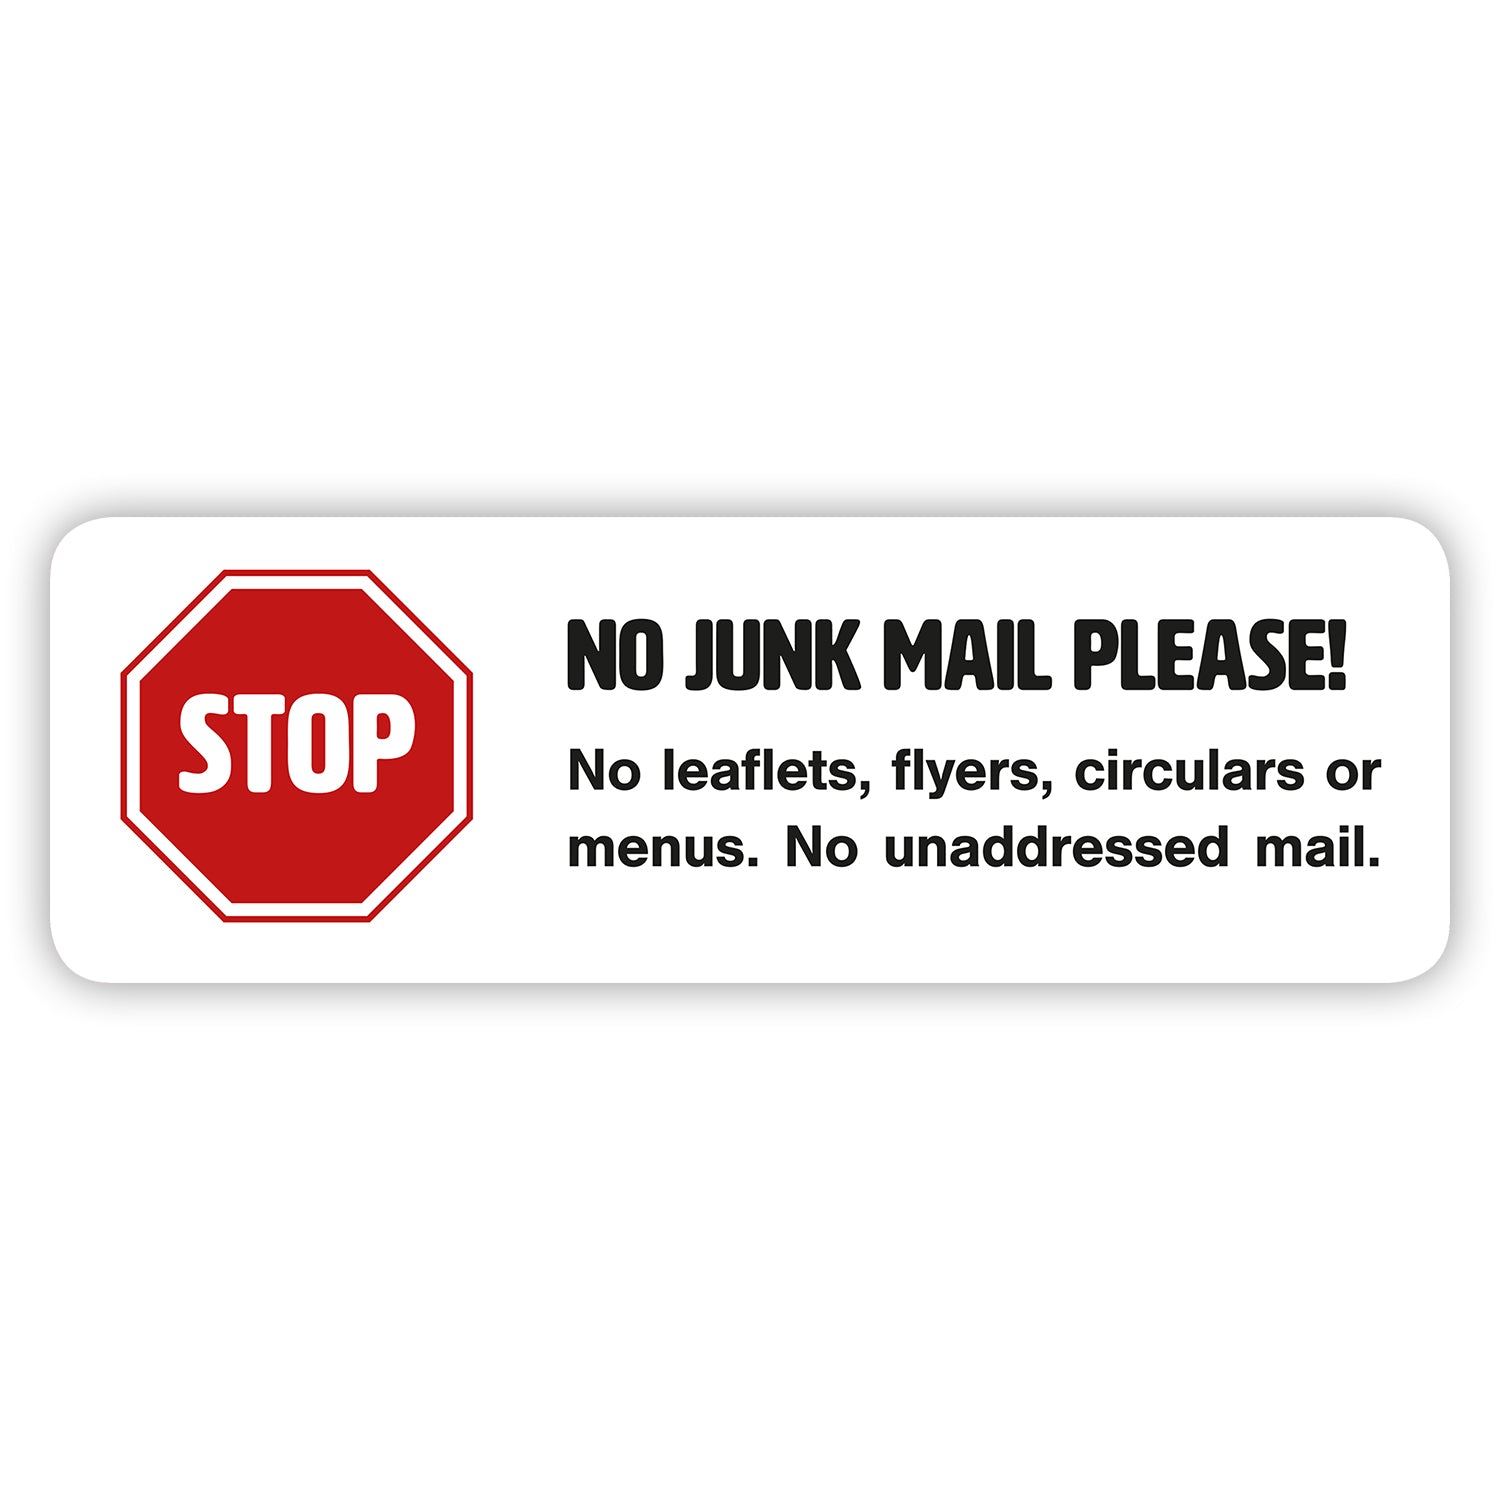 No Junk Mail Sign for Letterboxes - Junk Mail Blocker by Gobrecht & Ulrich